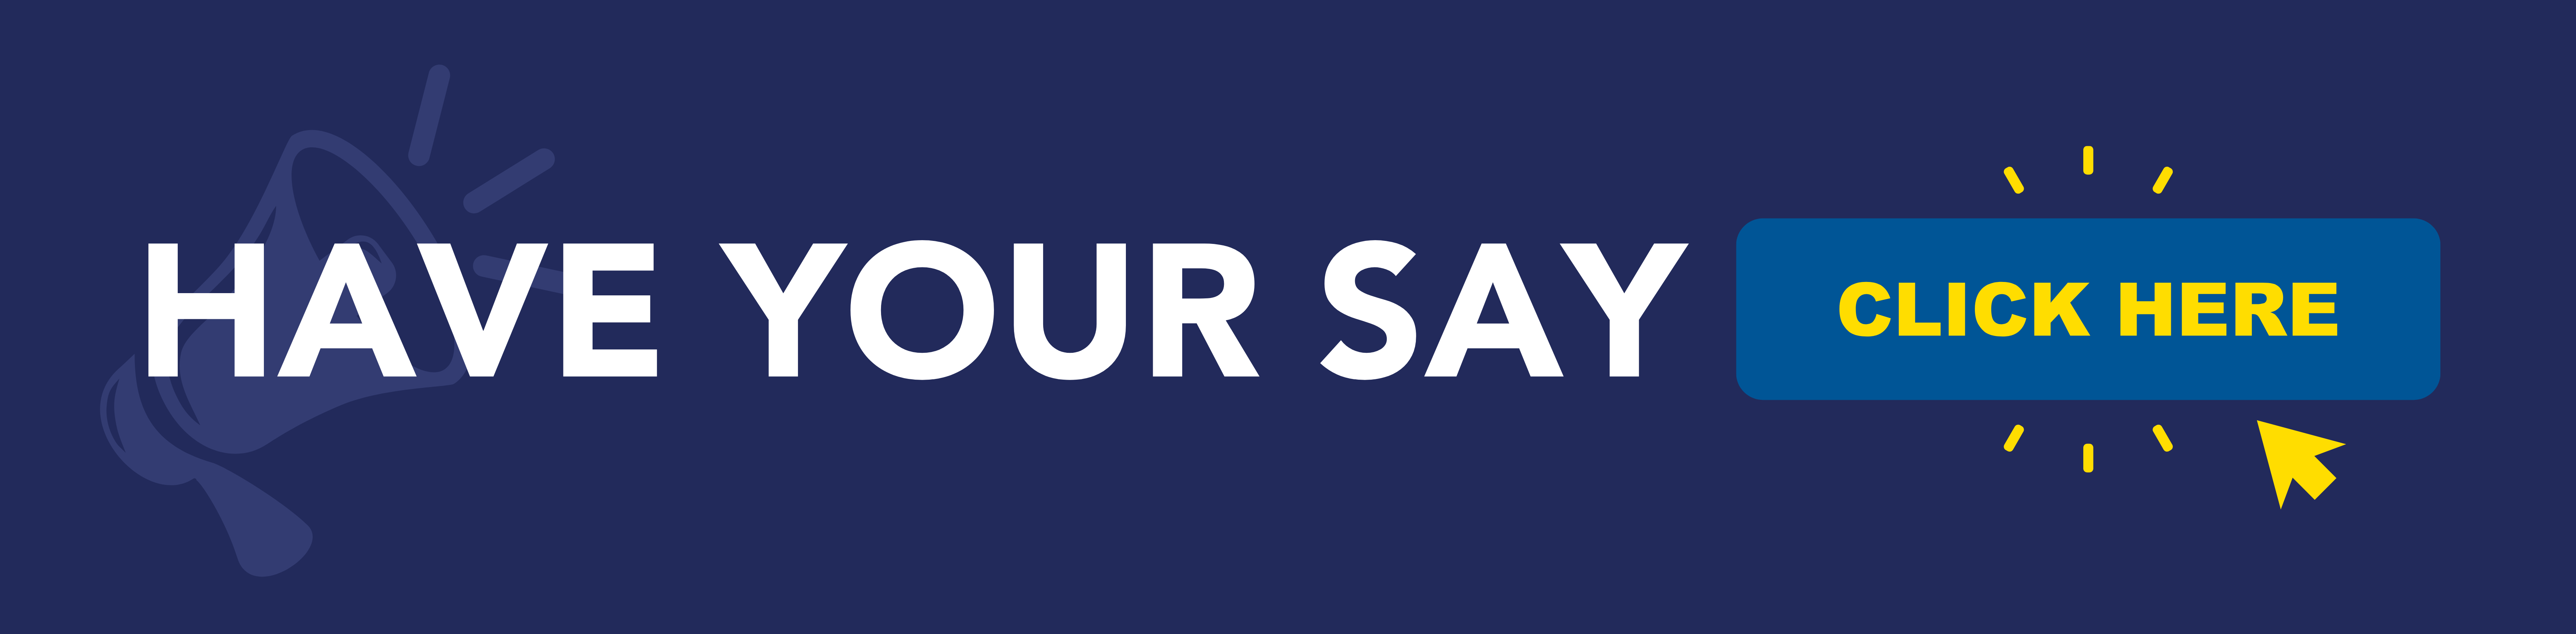 Have your say page - click here